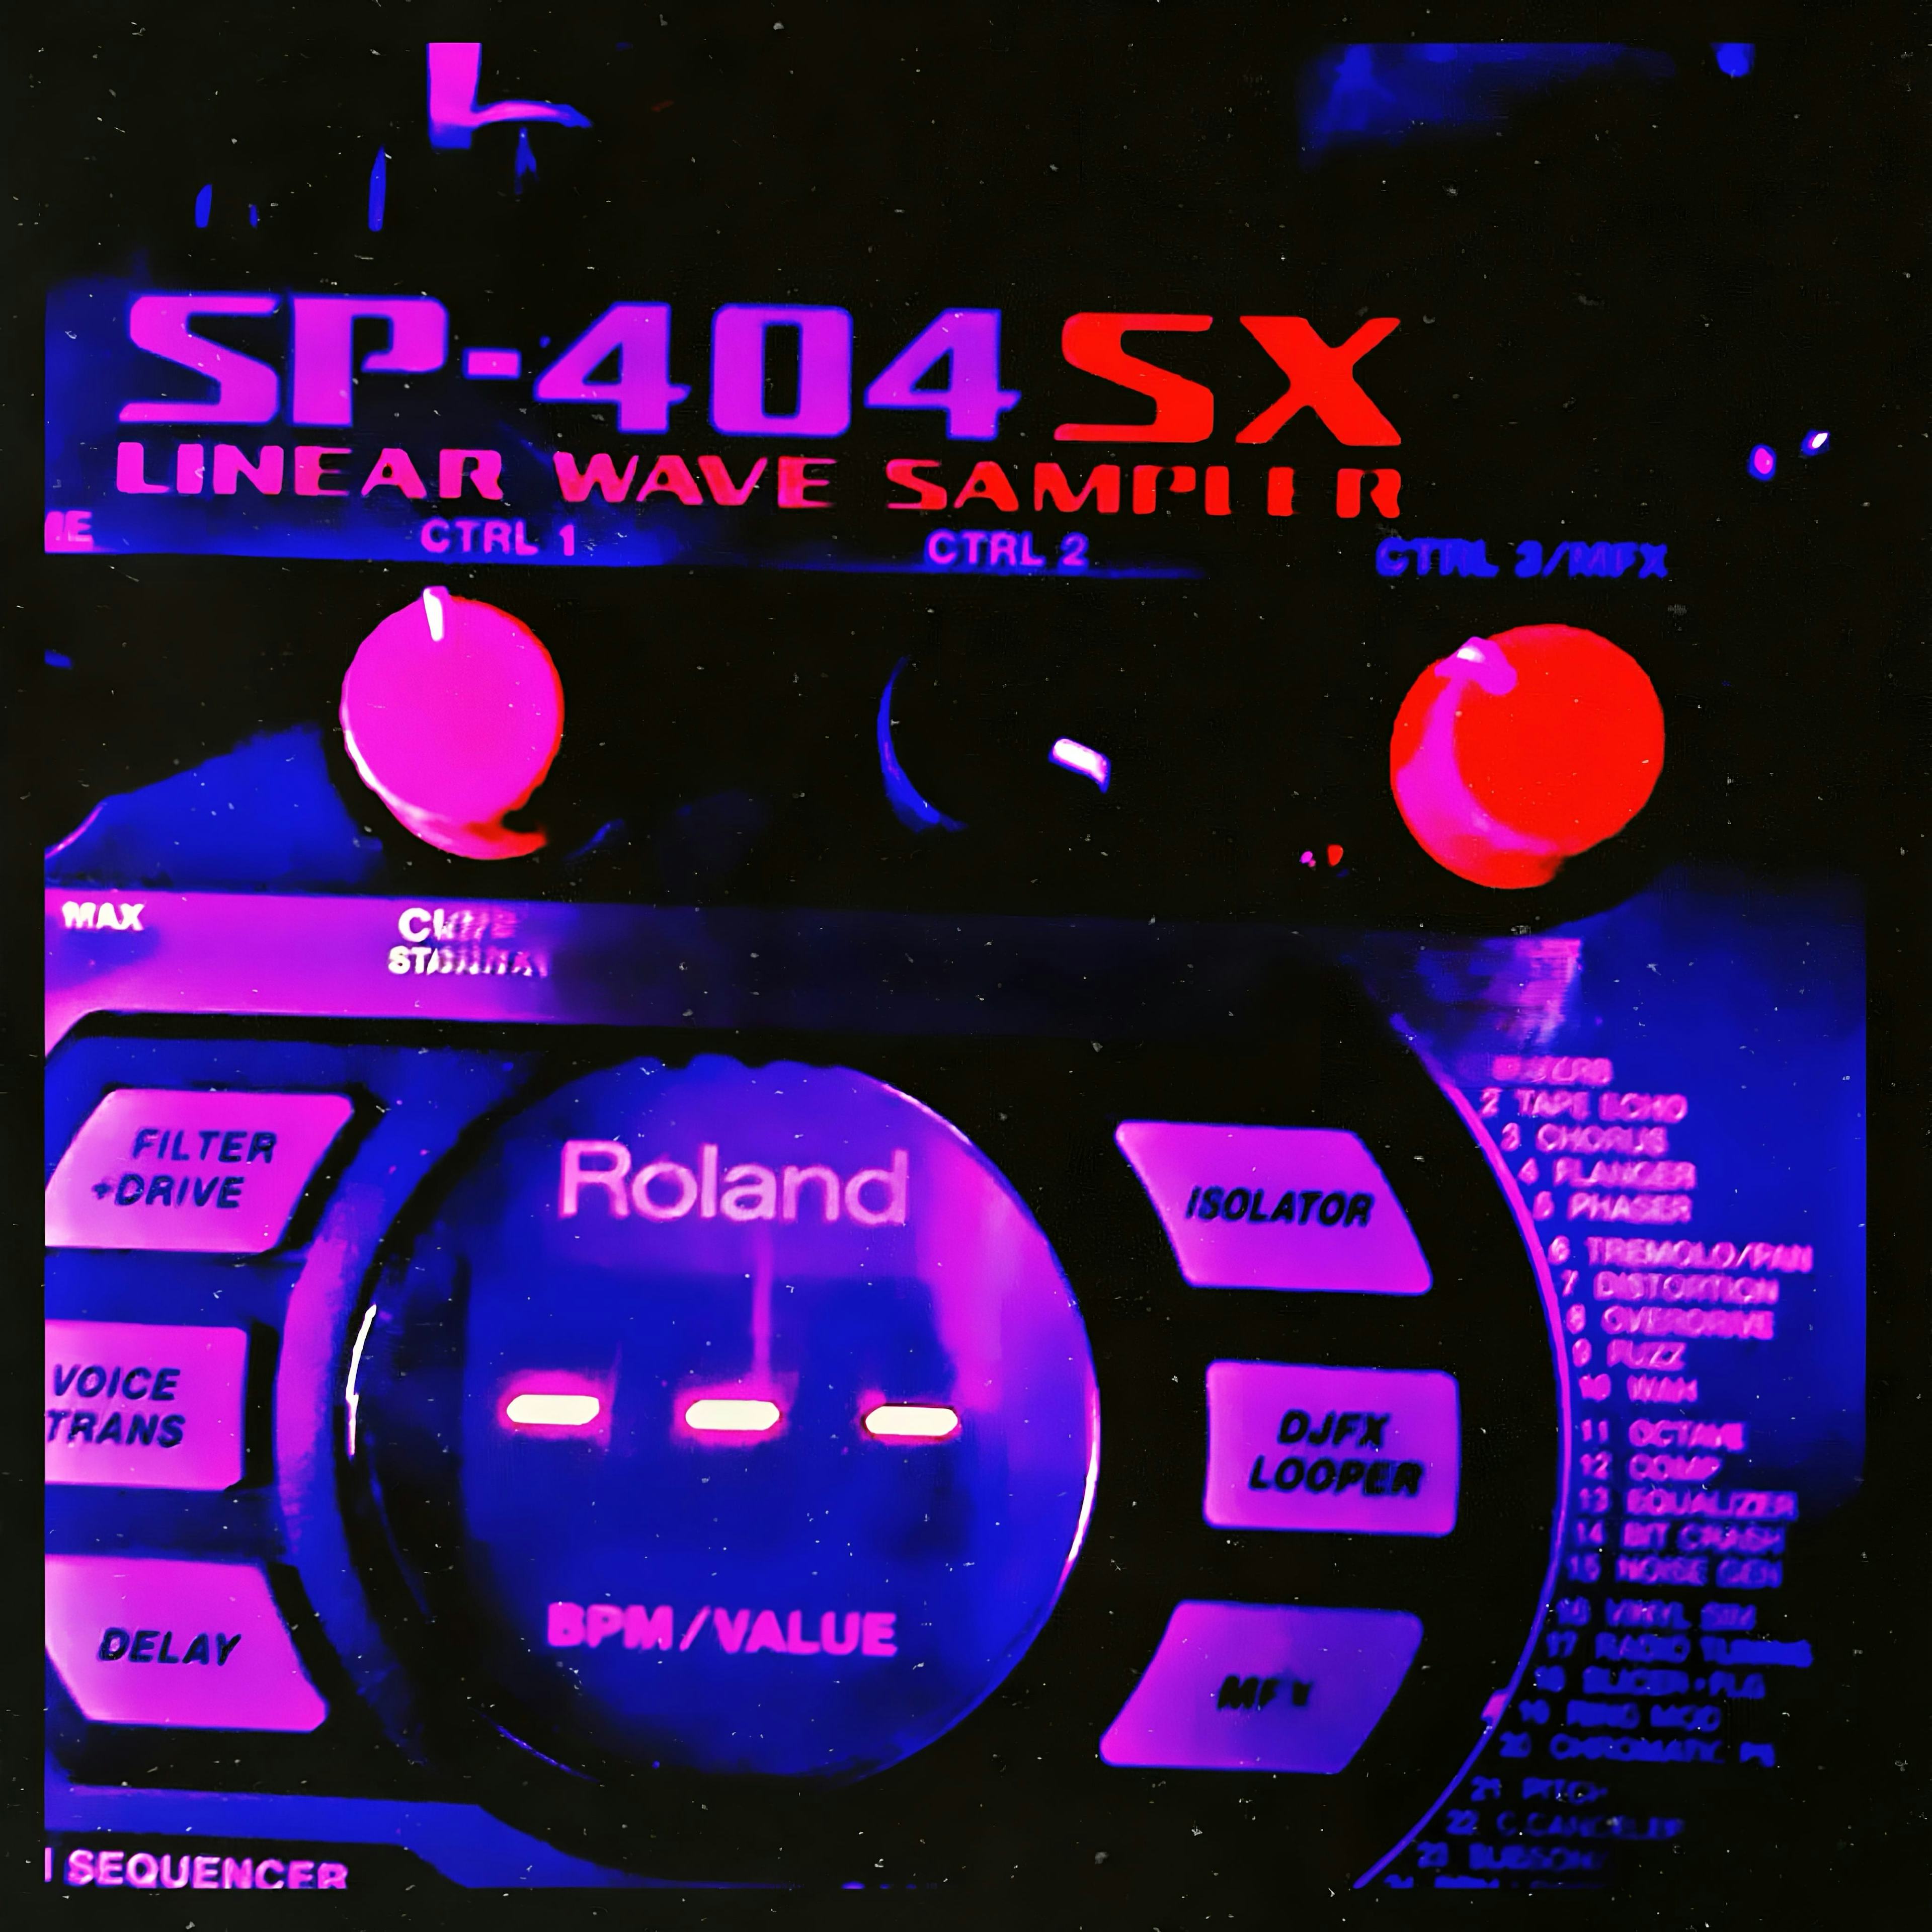 Cover art for #404day by Dutchyyy